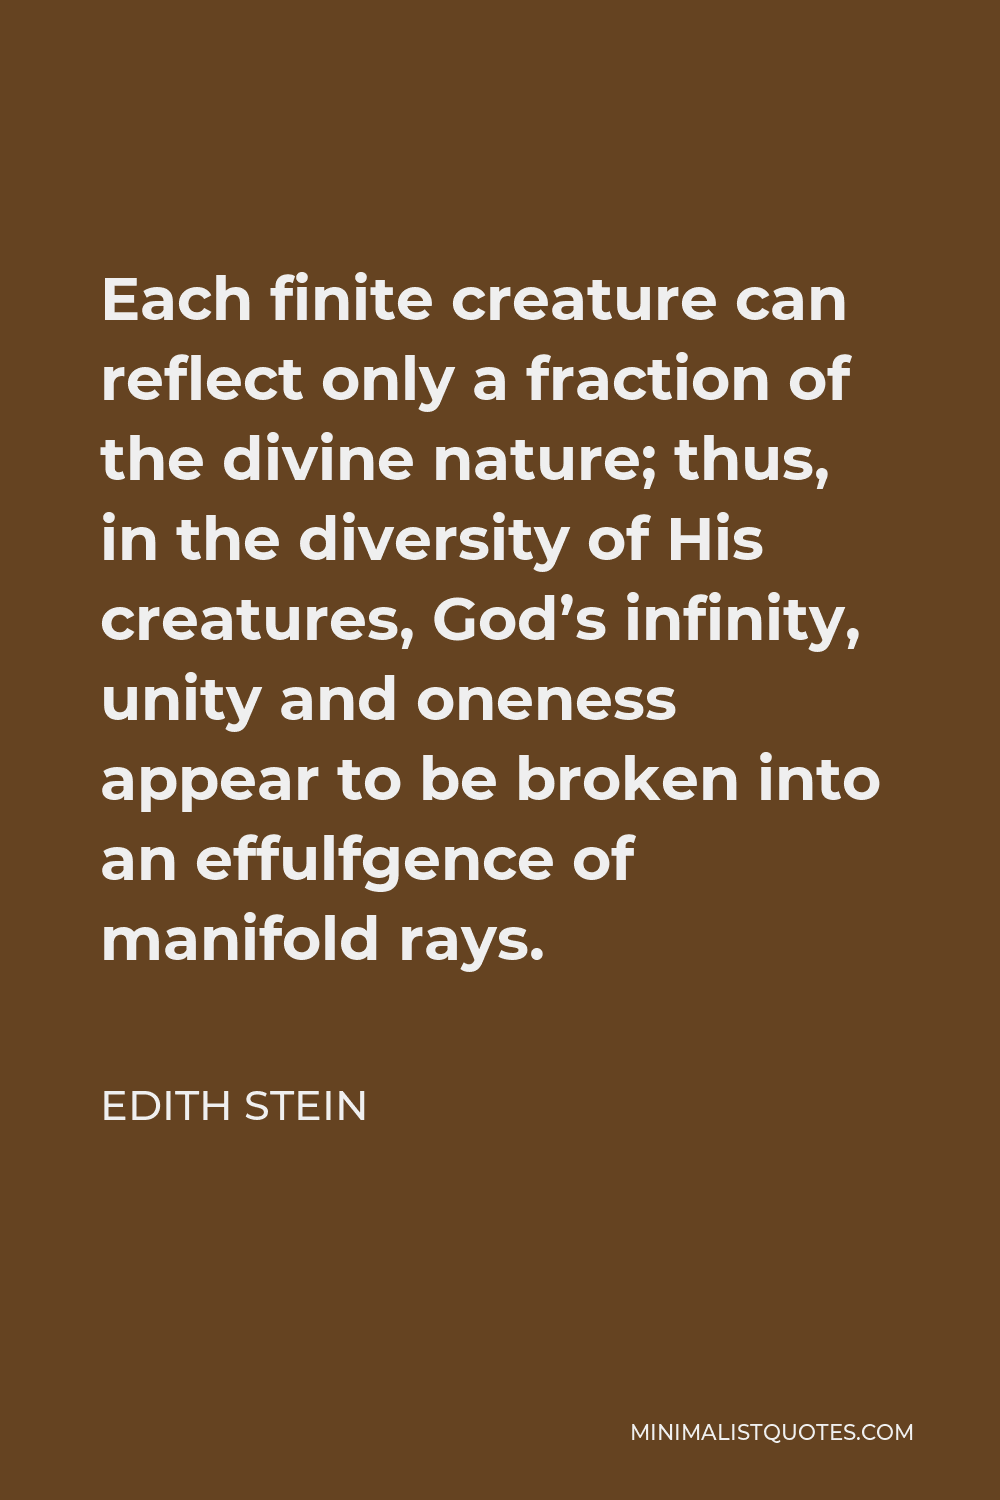 Edith Stein Quote - Each finite creature can reflect only a fraction of the divine nature; thus, in the diversity of His creatures, God’s infinity, unity and oneness appear to be broken into an effulfgence of manifold rays.